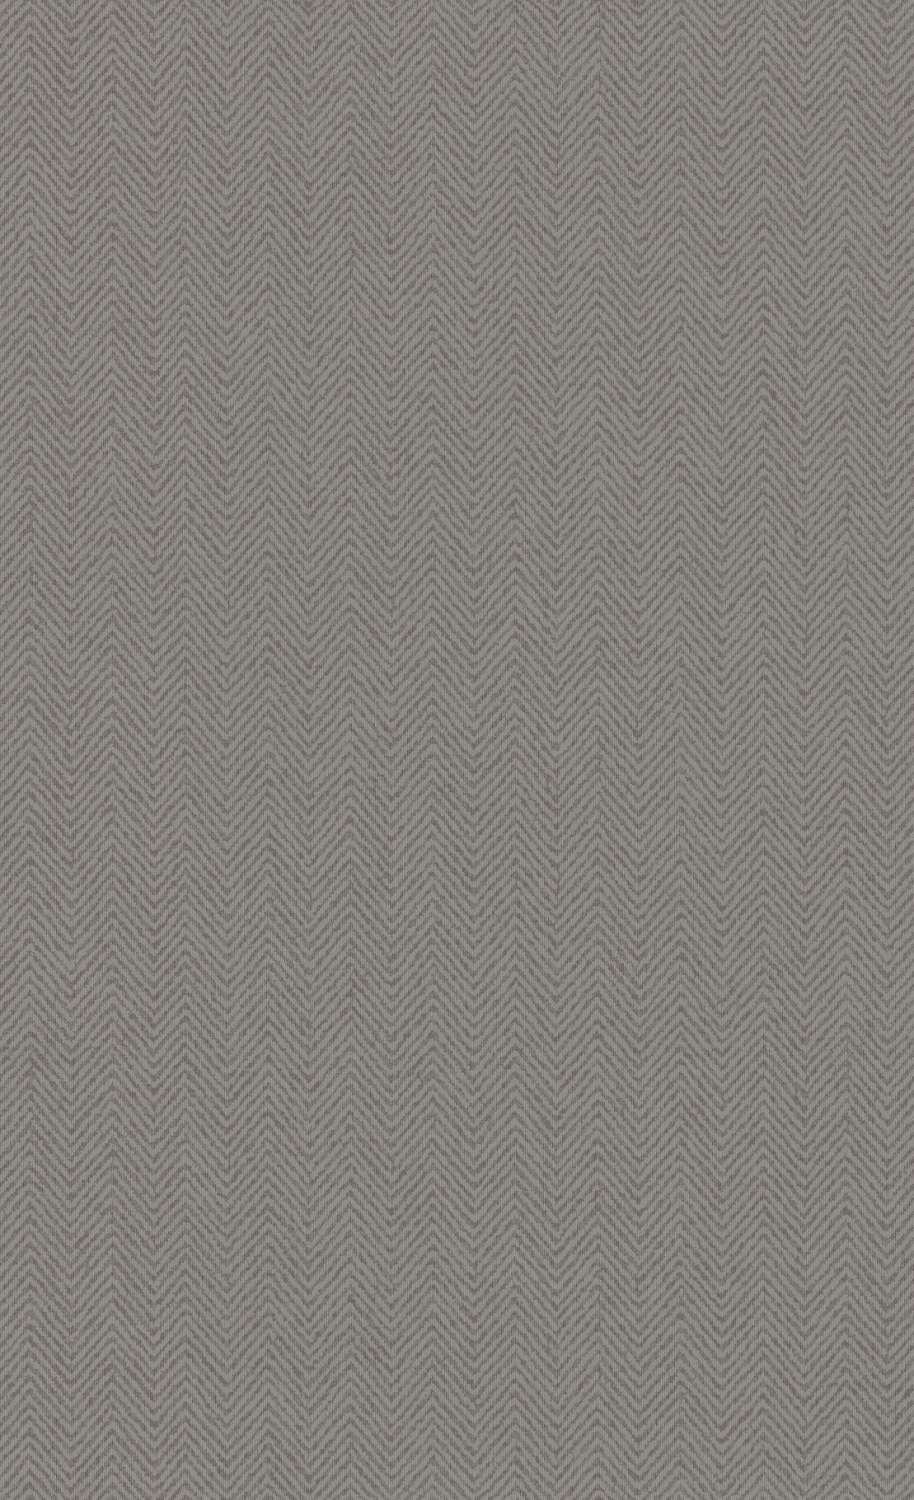 Light Gray Minimalist Commercial Wallpaper C7325 | Commercial and Hospitality